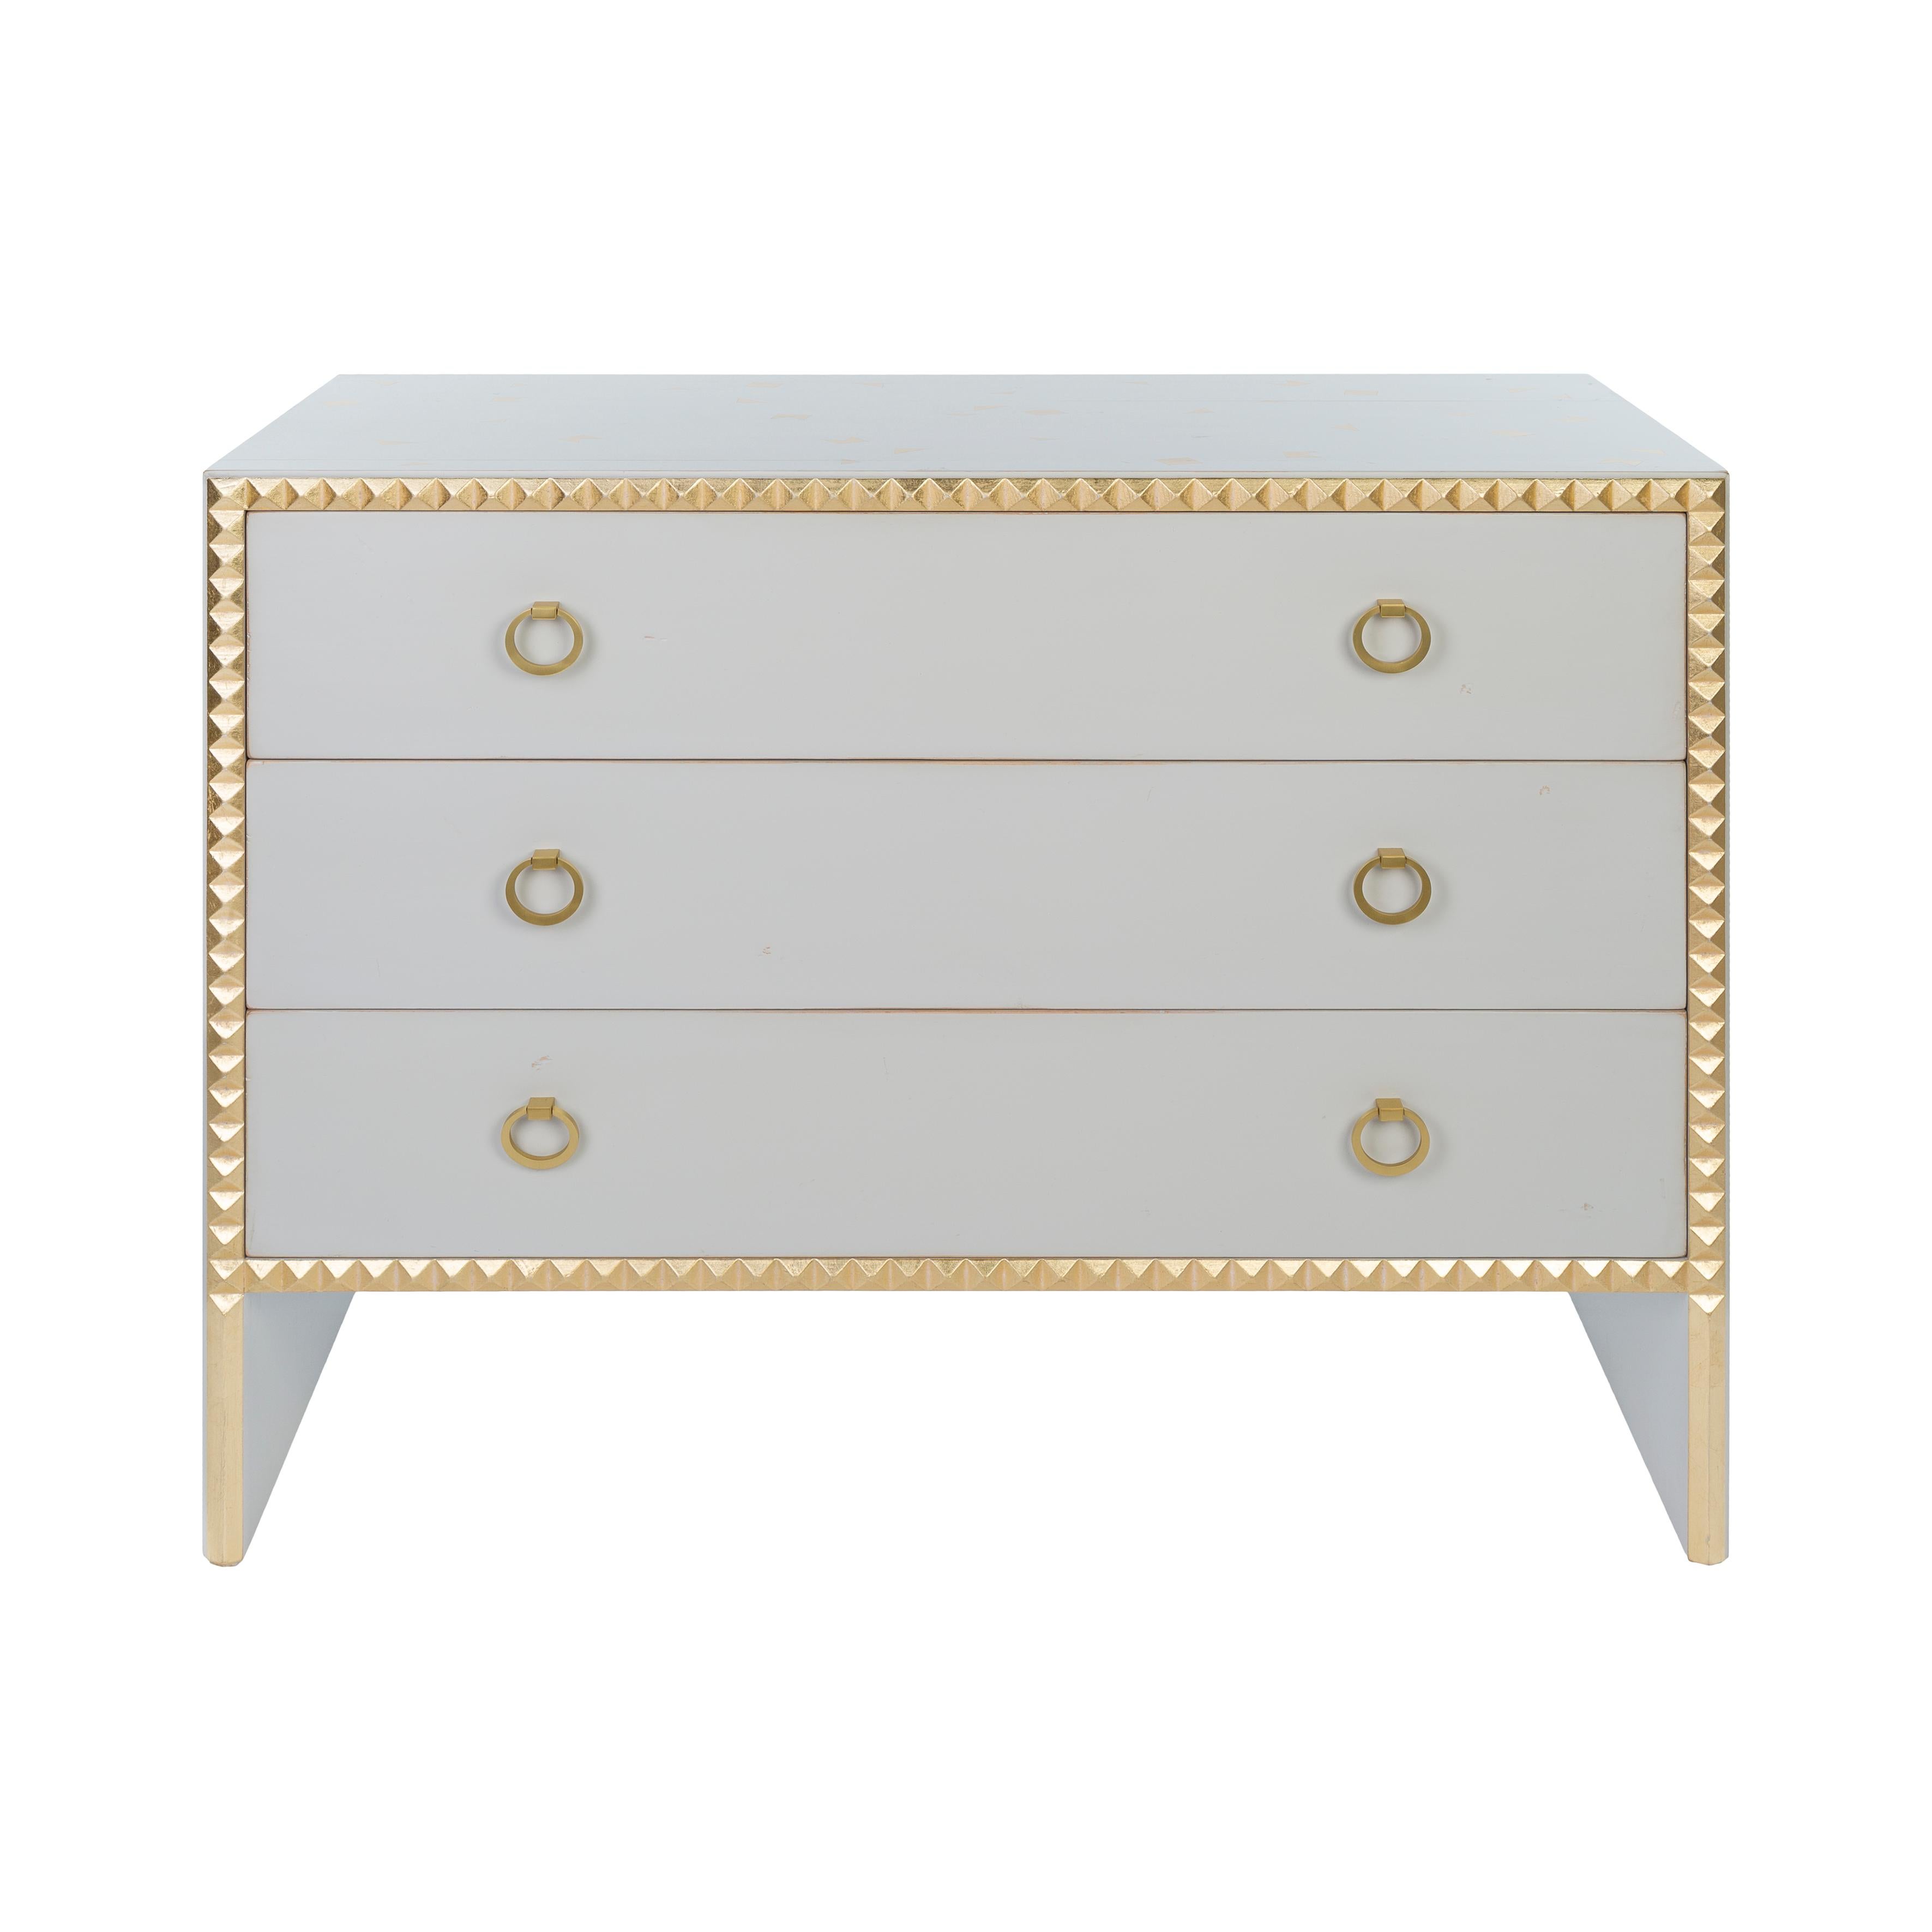 Gris Couture lacquered beech chest-of-drawers. Three drawers on metal rails. Diamond-tipped edgings enhanced with gold highlights. Proposed with a gold stencil decoration. 
It is a piece of furniture made by hand by the craftsmen of Moissonnier, a